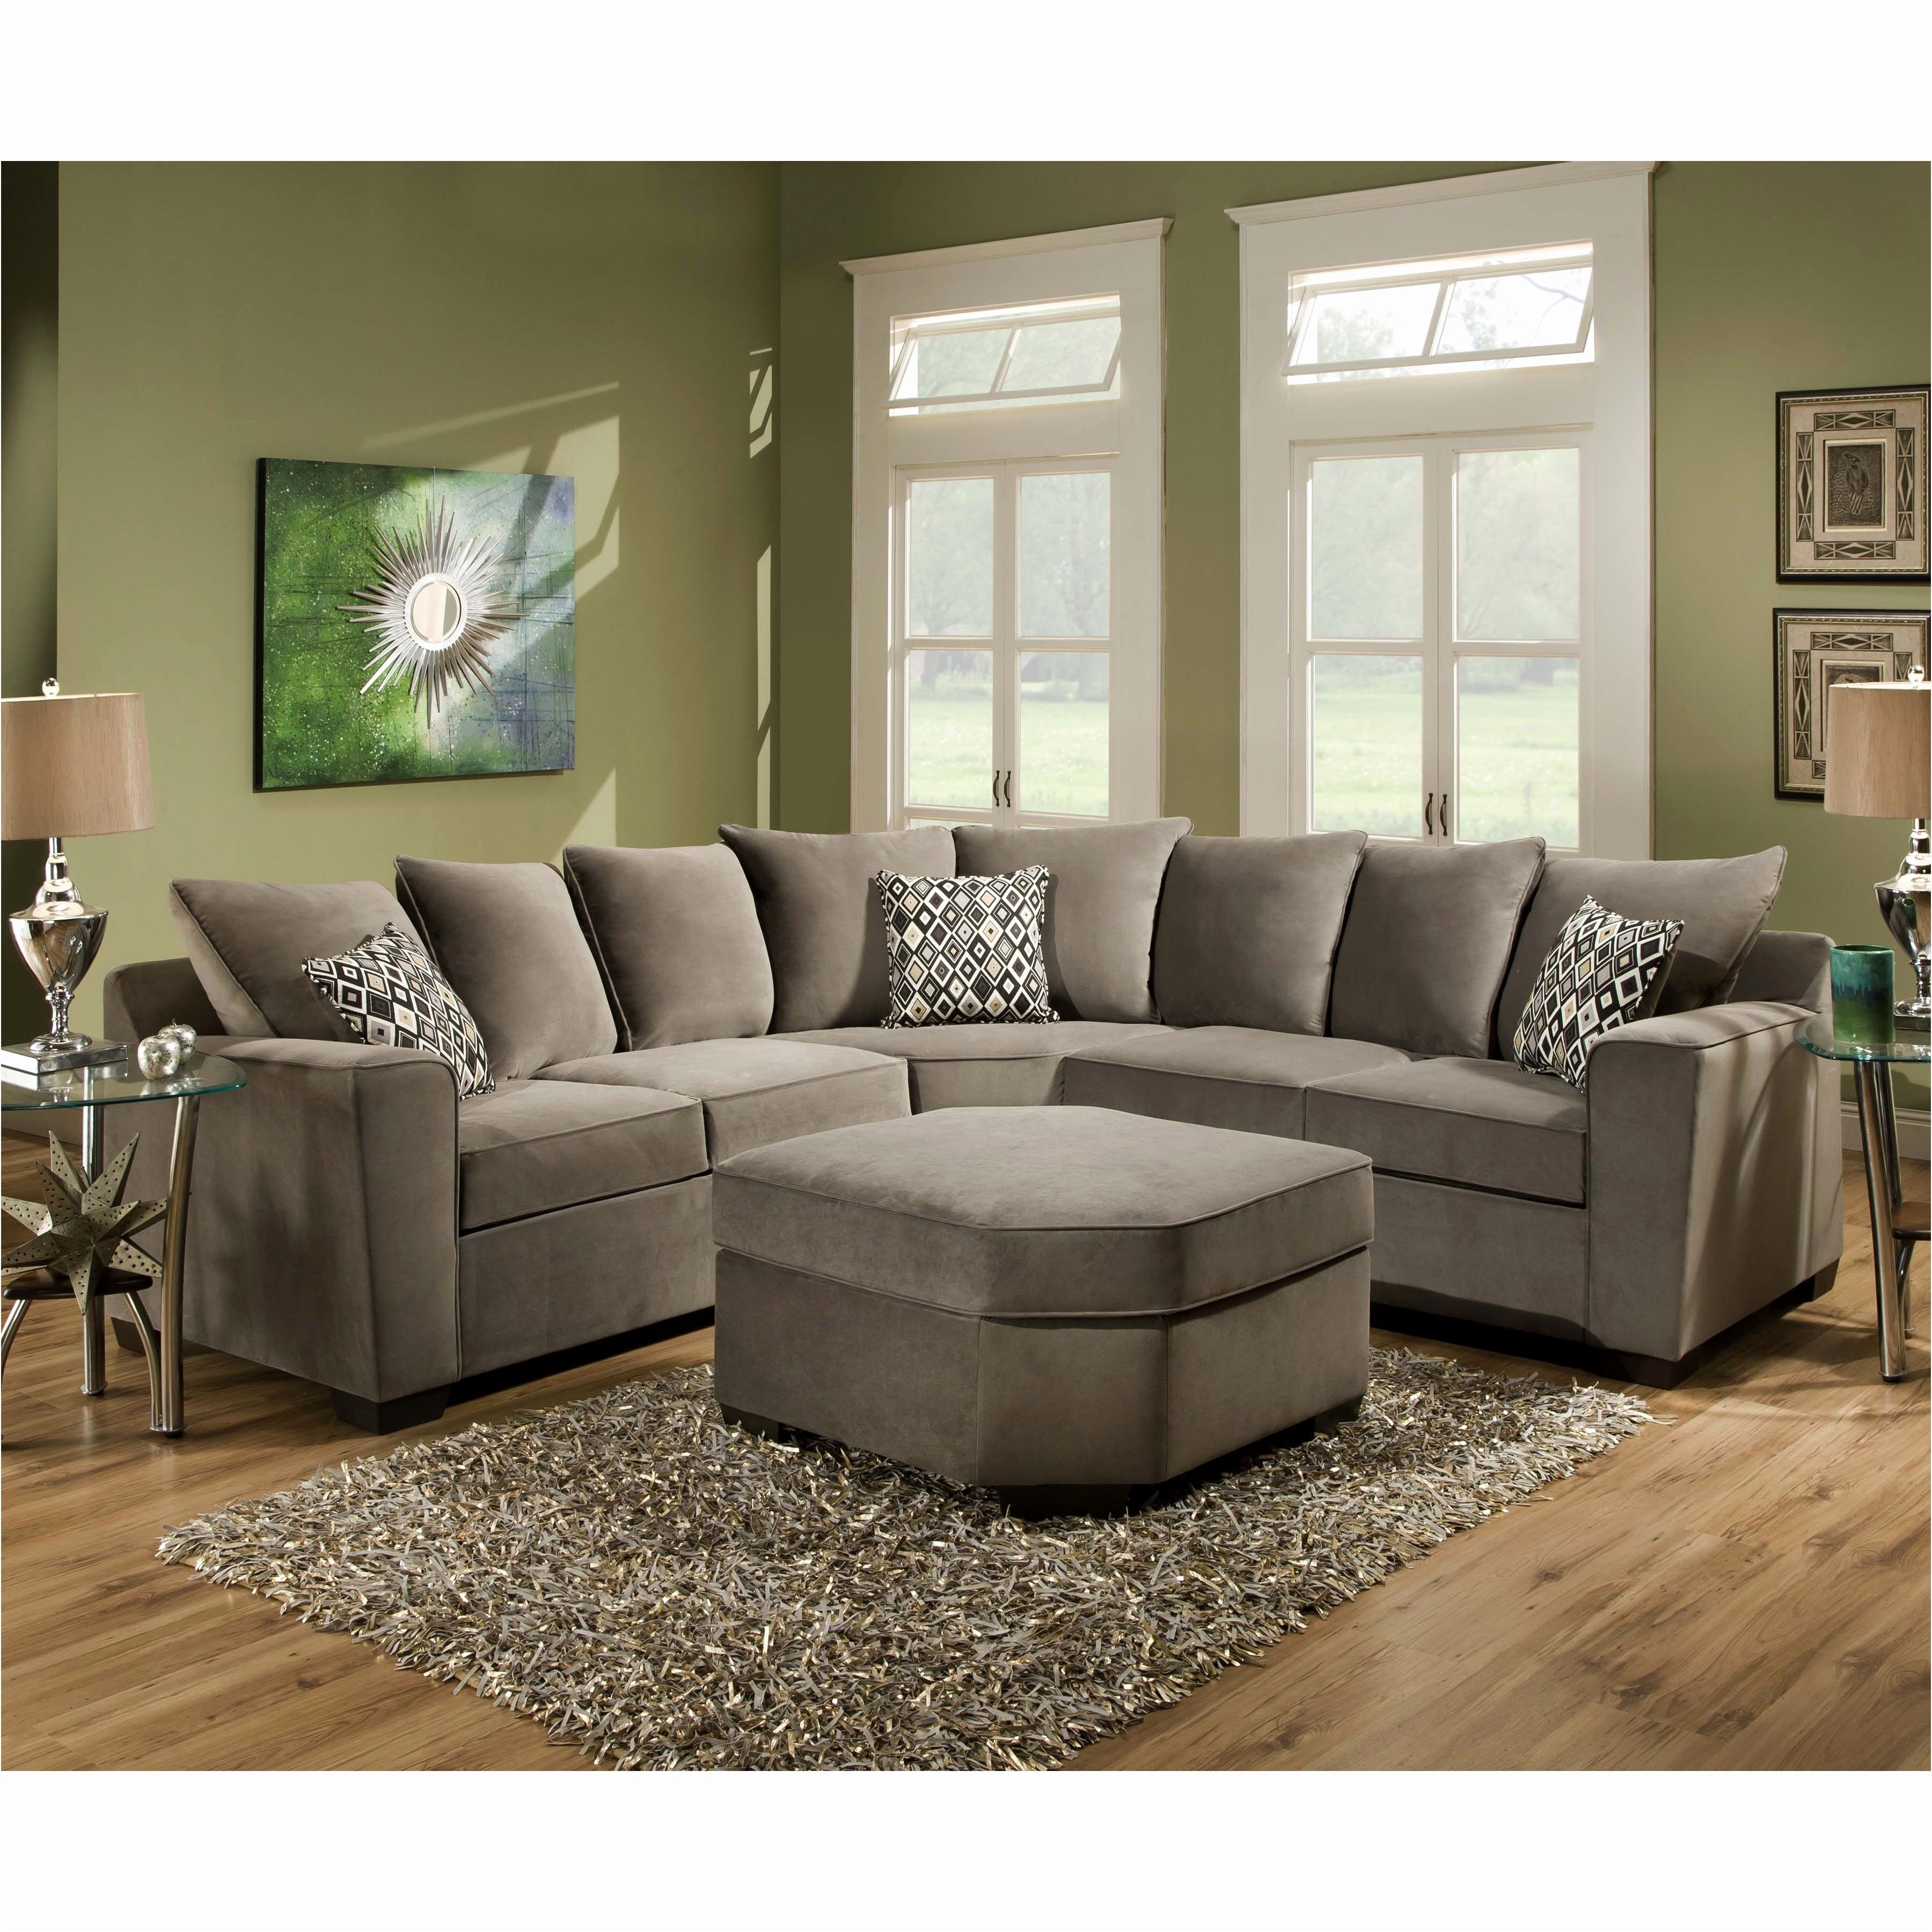 Elegant Cheap Sofas And Couches Inspirational – Intuisiblog Pertaining To Sears Sofas (View 6 of 10)